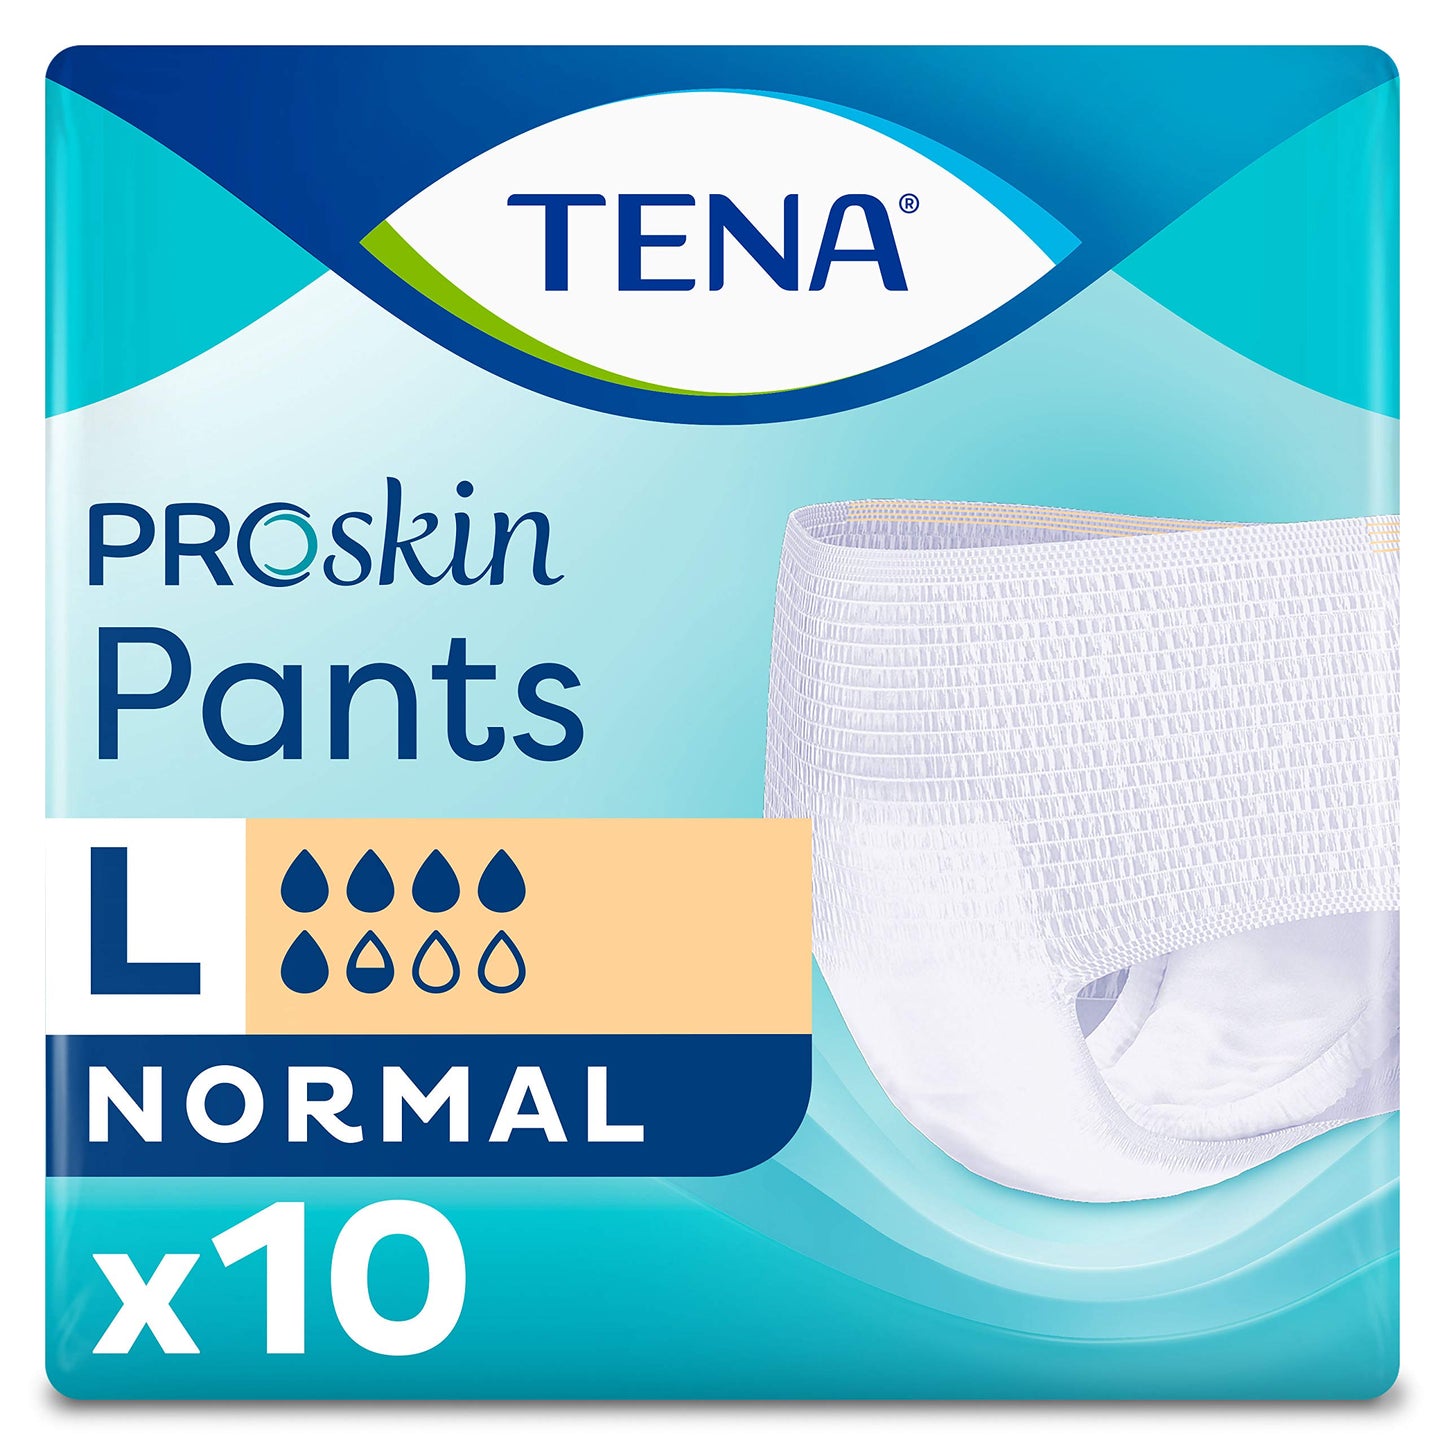 Tena Proskin Pants Normal, Incontinence Adult Unisex Pants, Large, 10 Count